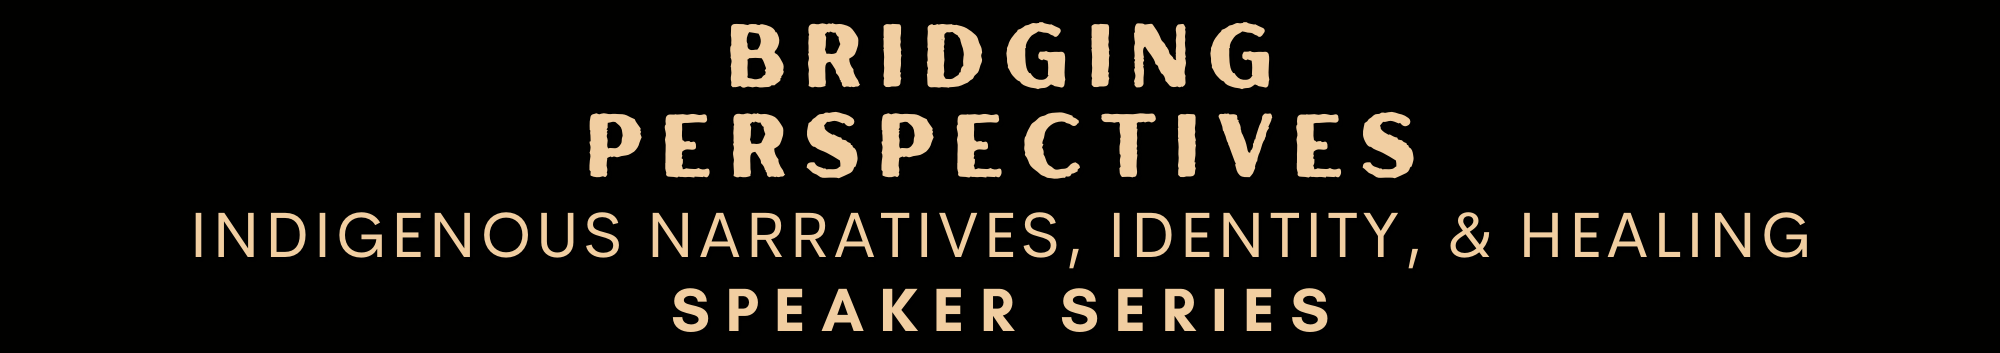 Bridging Perspectives - Indigenous narratives, identity, and healing - Speaker Series